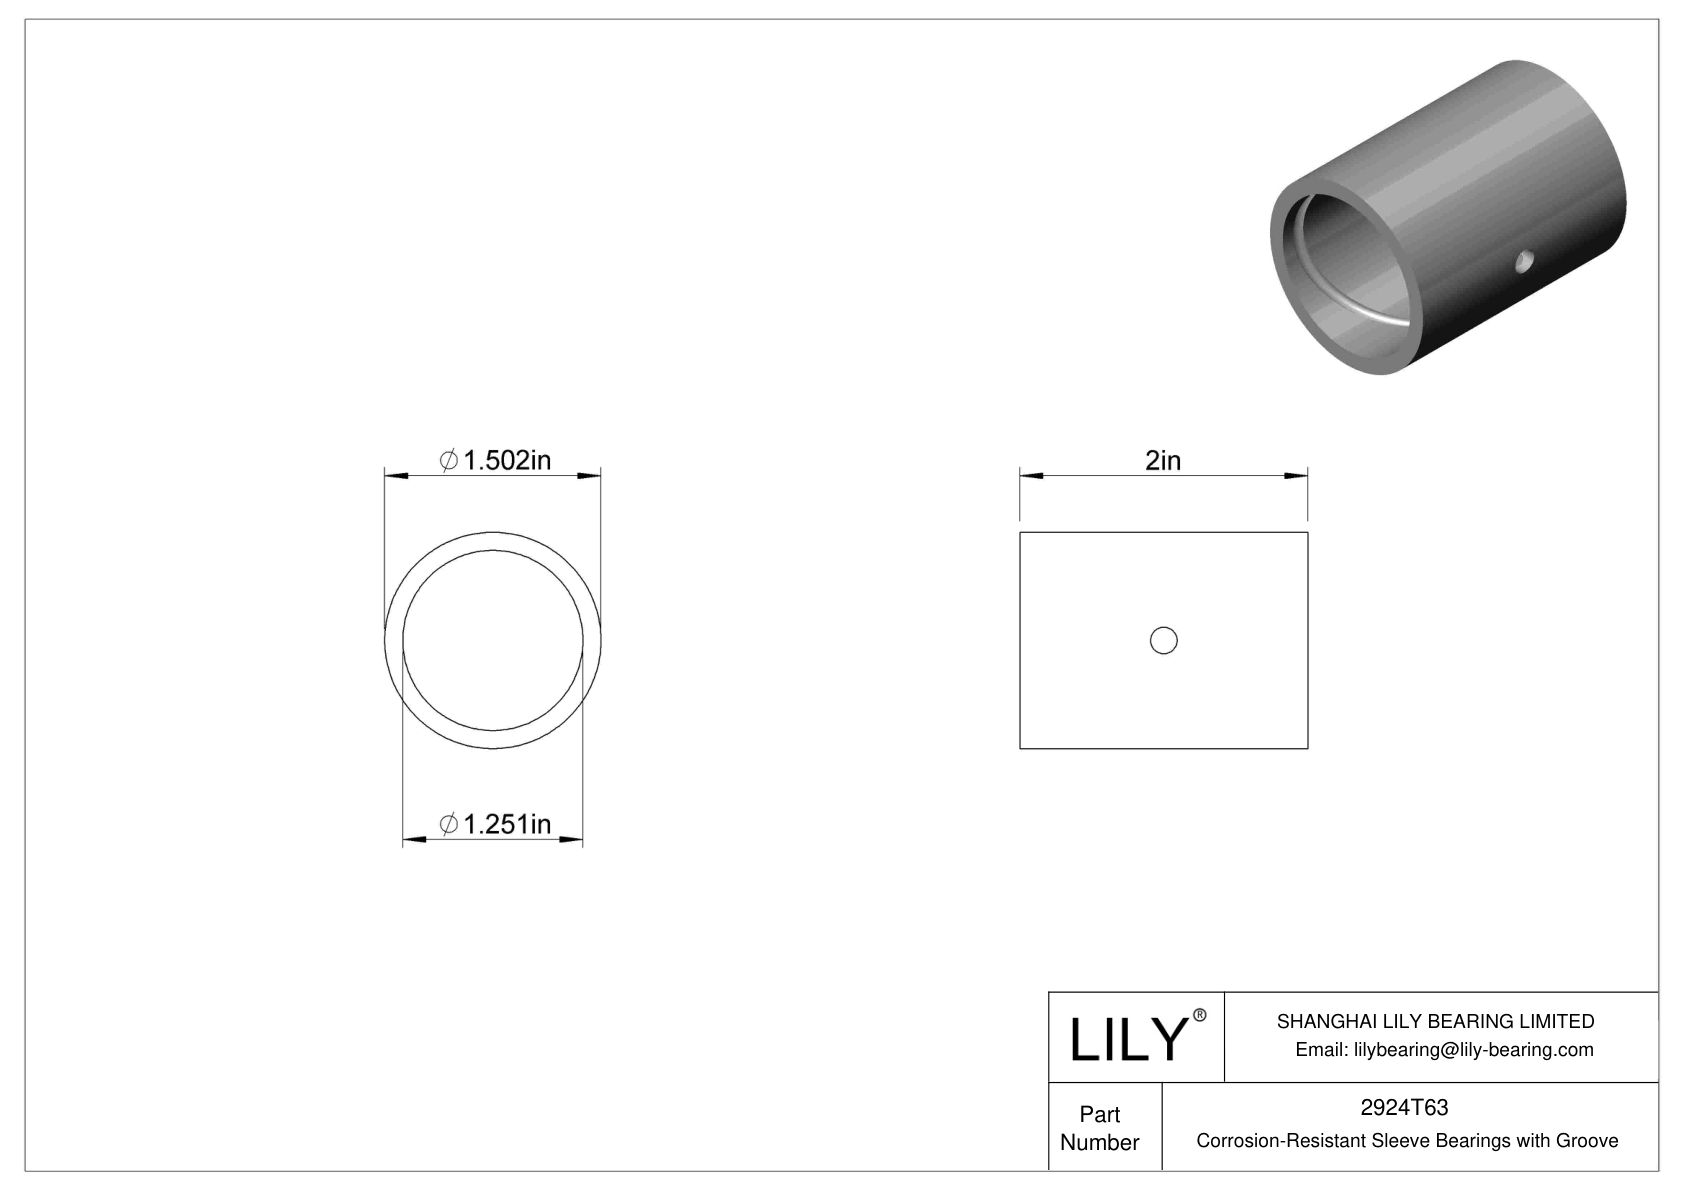 CJCETGD Corrosion-Resistant Sleeve Bearings with Groove cad drawing